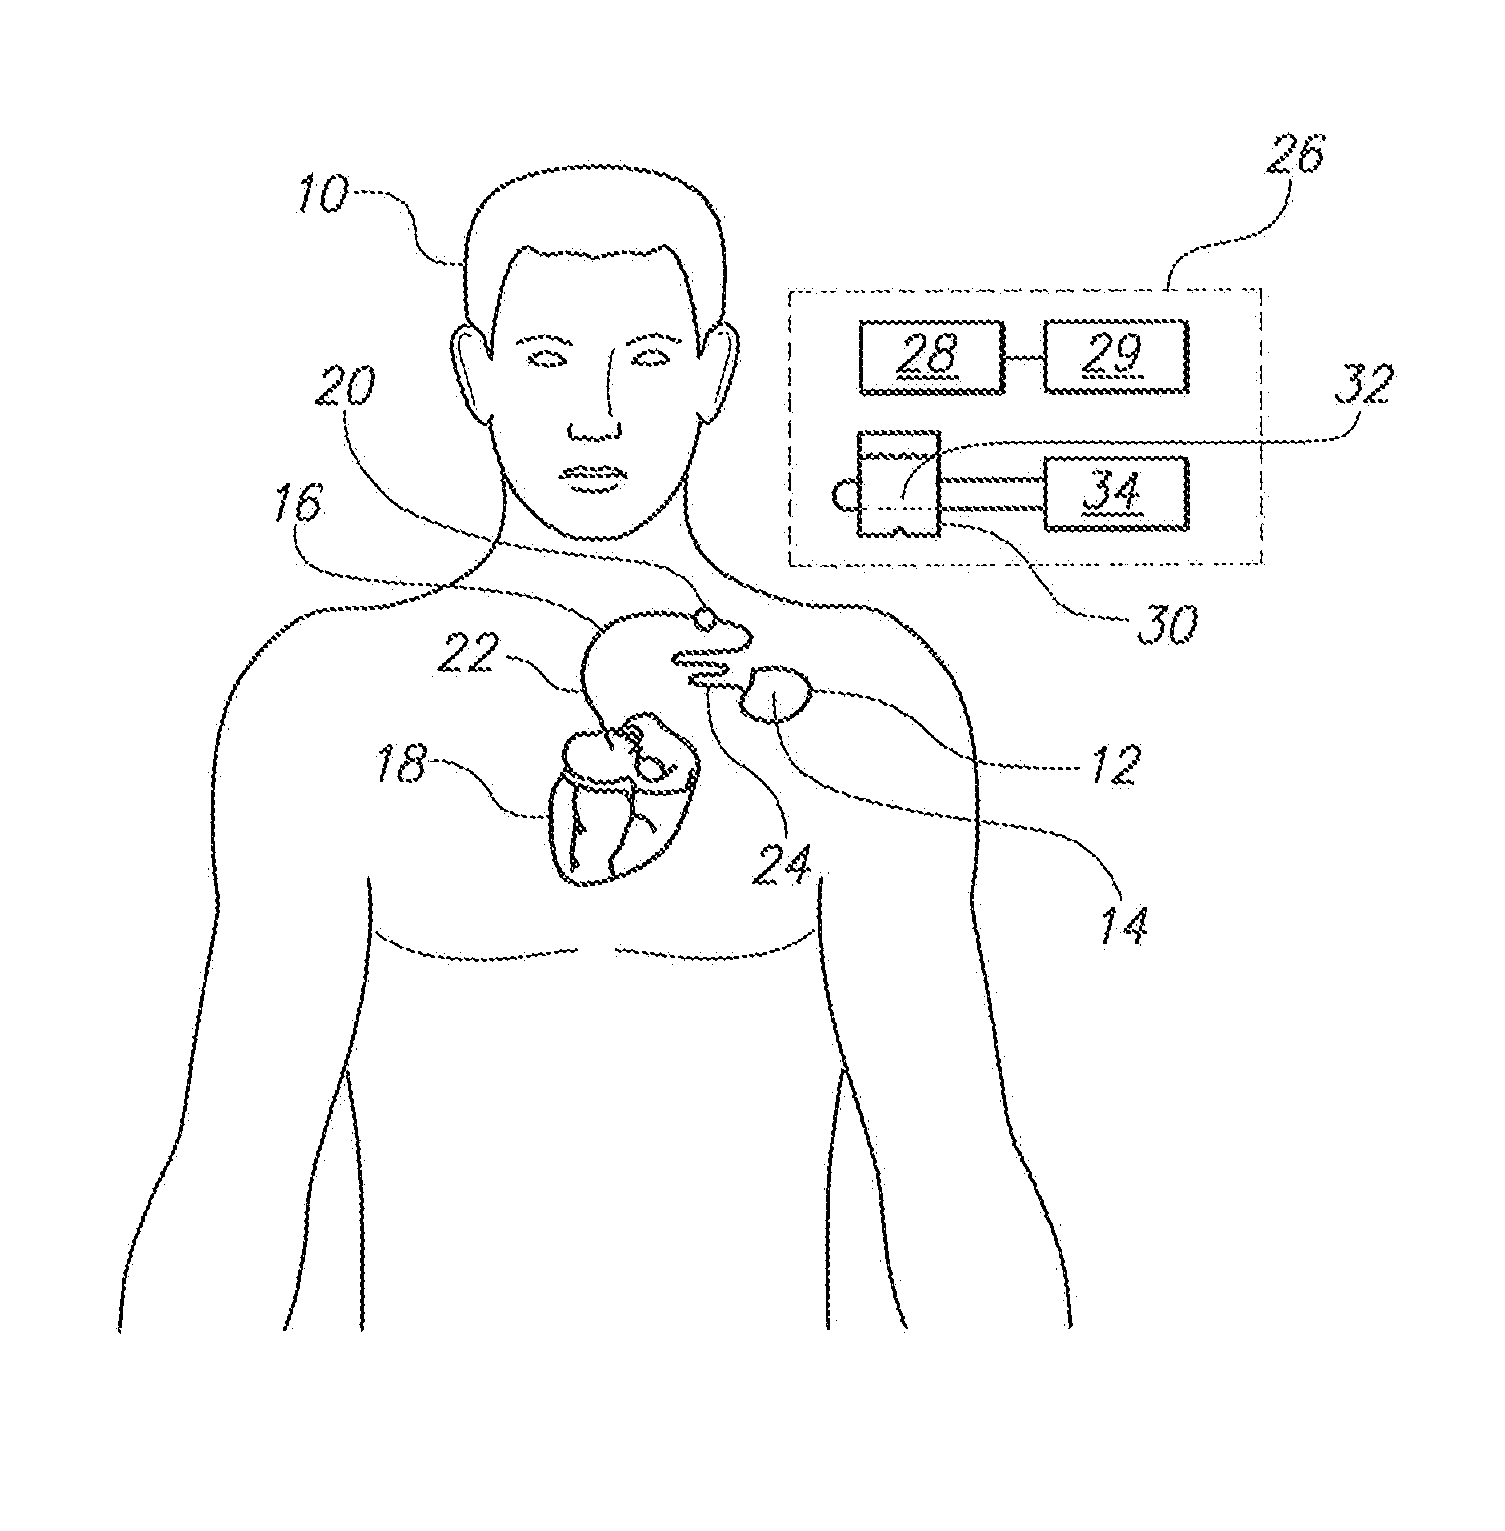 Extracorporeal Unit for Inspecting the Insulation of an Electrical Wire of an Implanted Medical Device